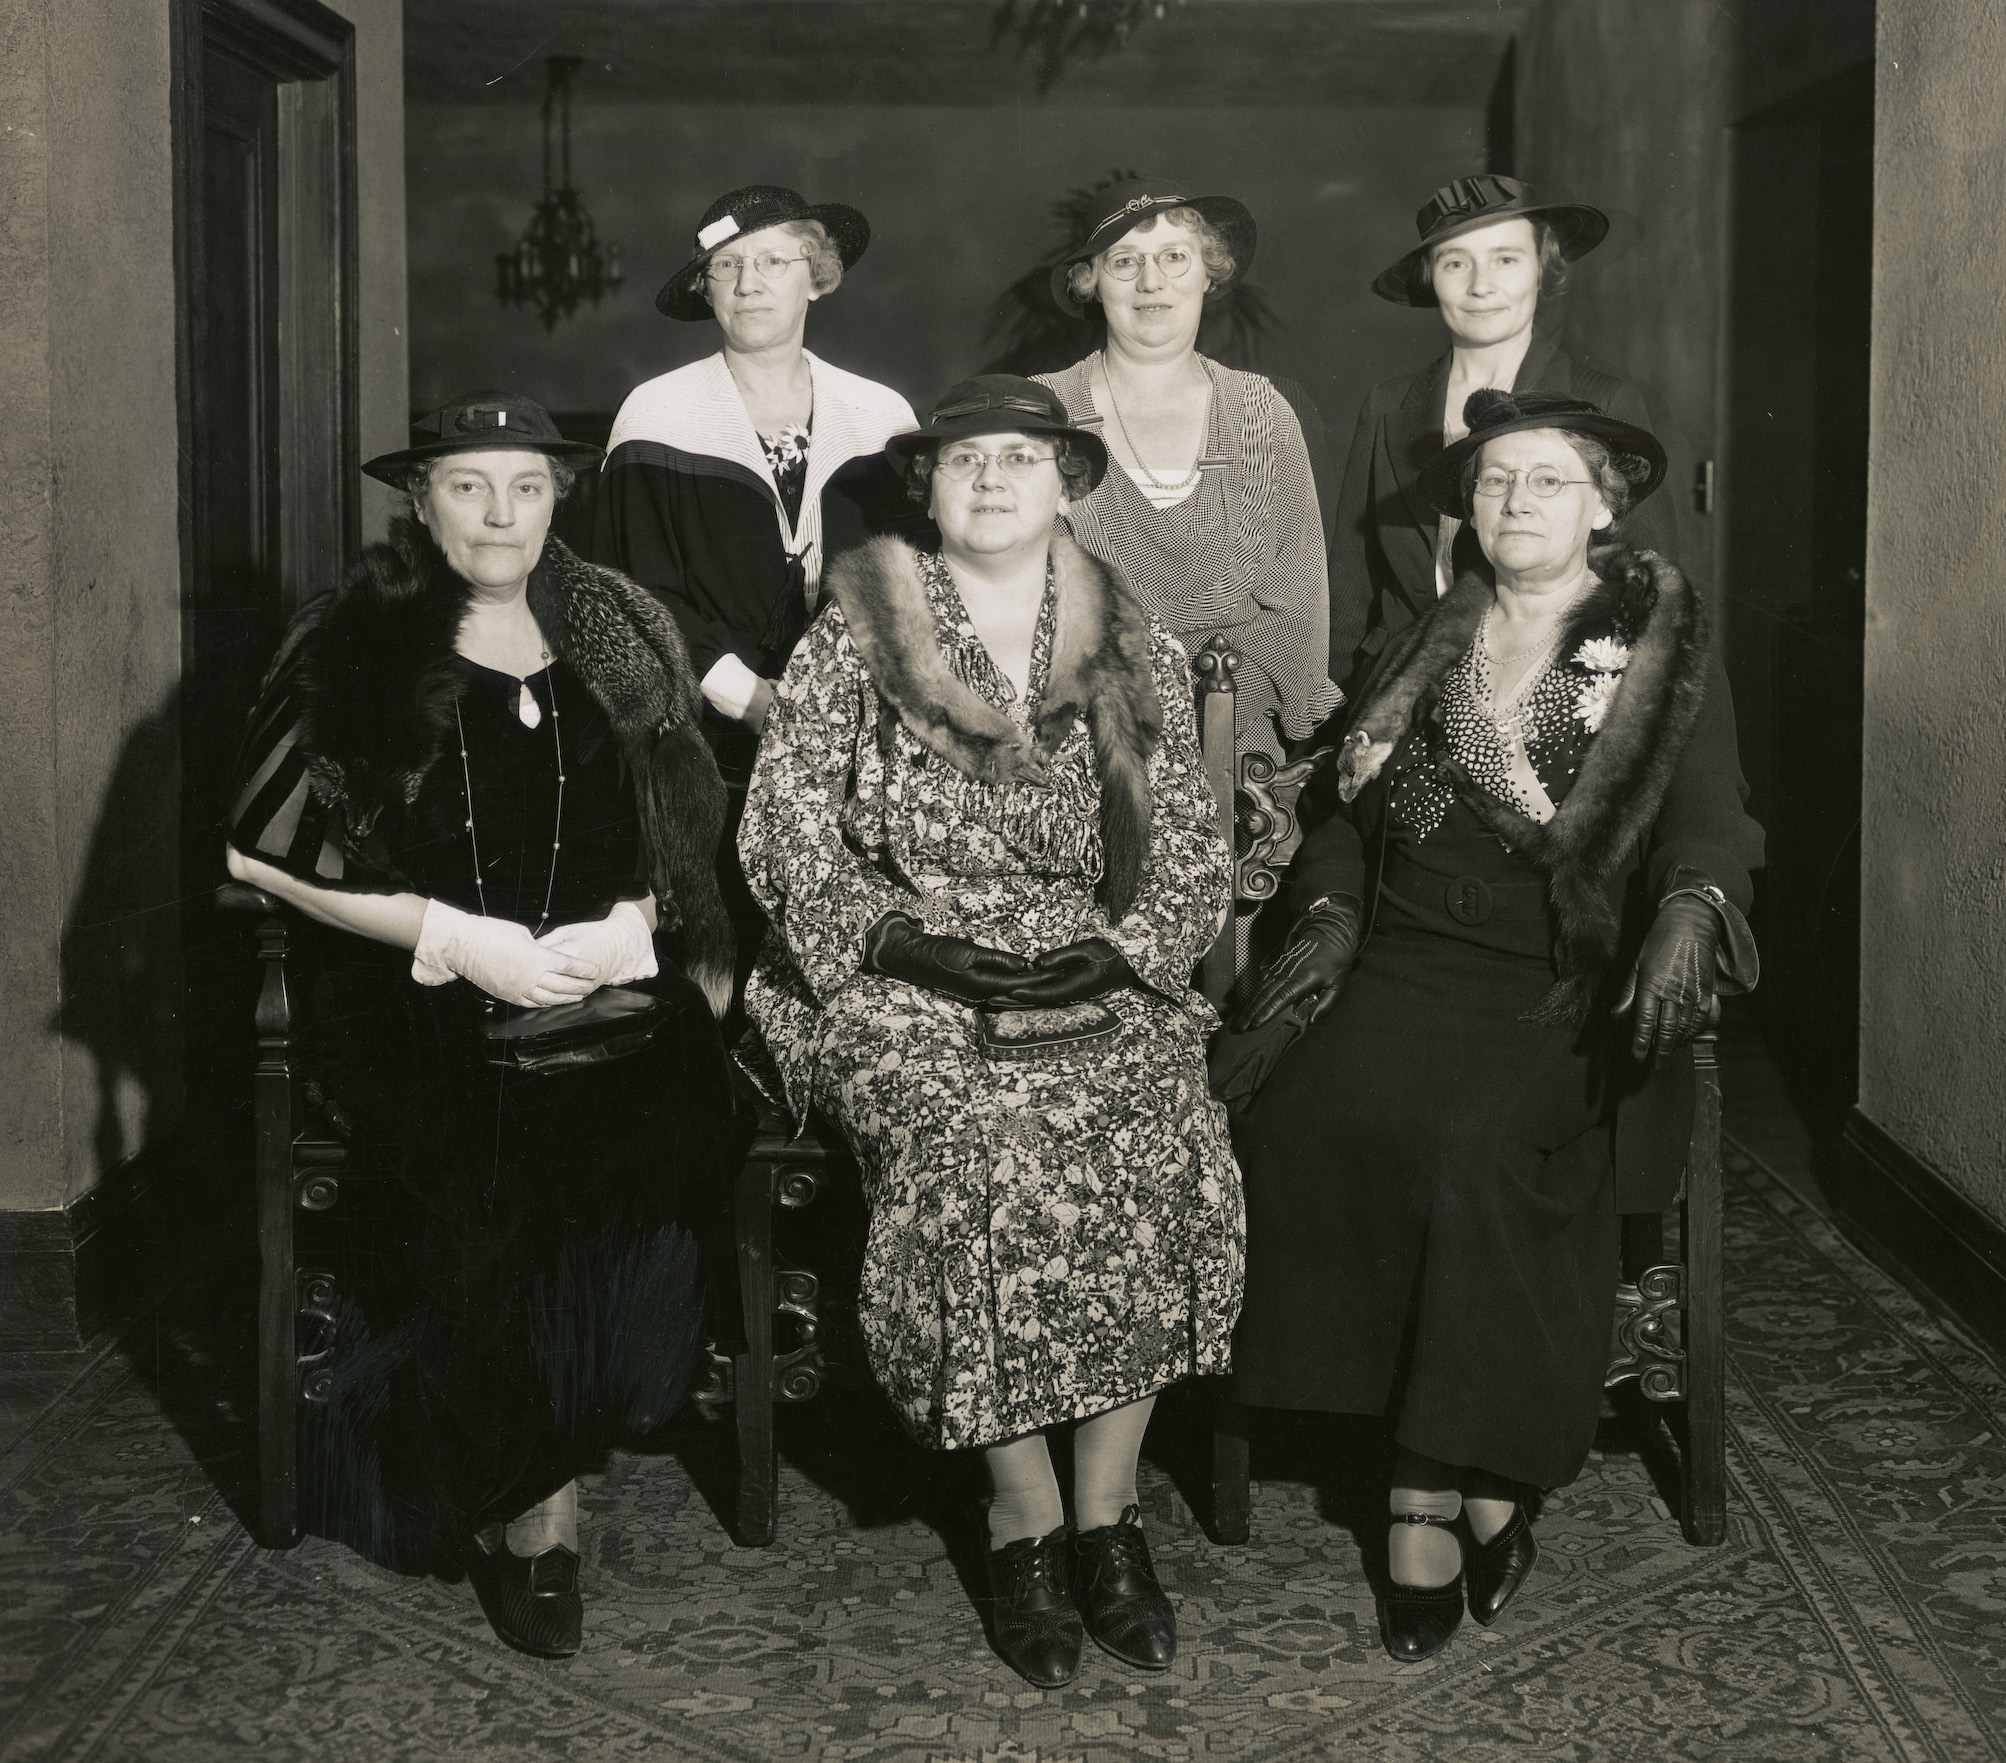 Formal black and white portrait of six hospital staff. Three of the women are seated in chairs while another three women pose behind them.